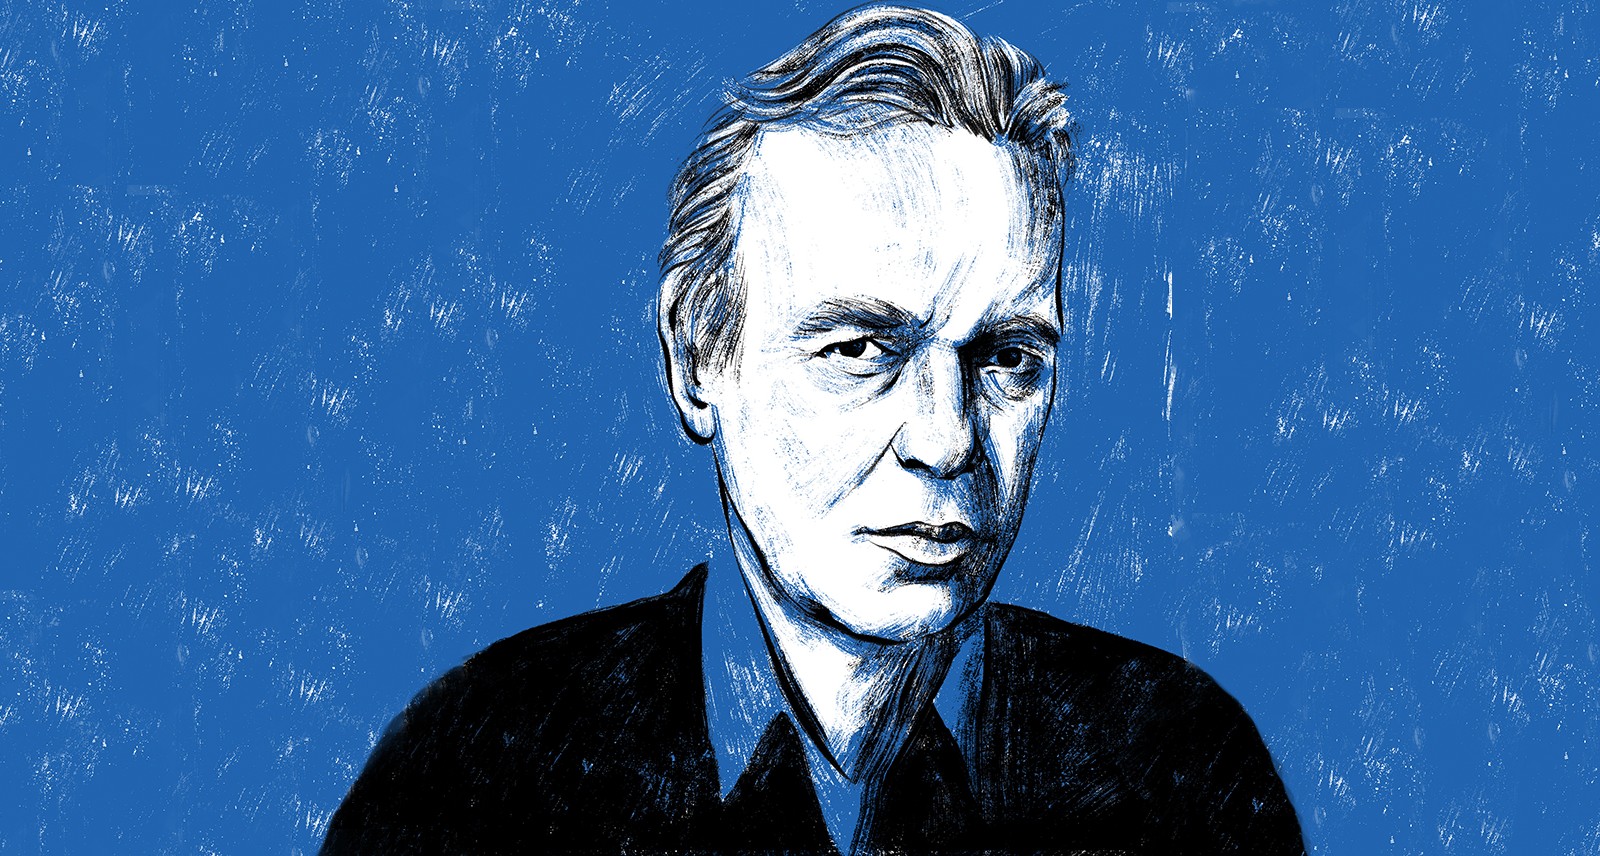 Martin Amis, O.G. of the Hot Take, Talks Meghan Markle, America, and Trump's Cognitive Decline